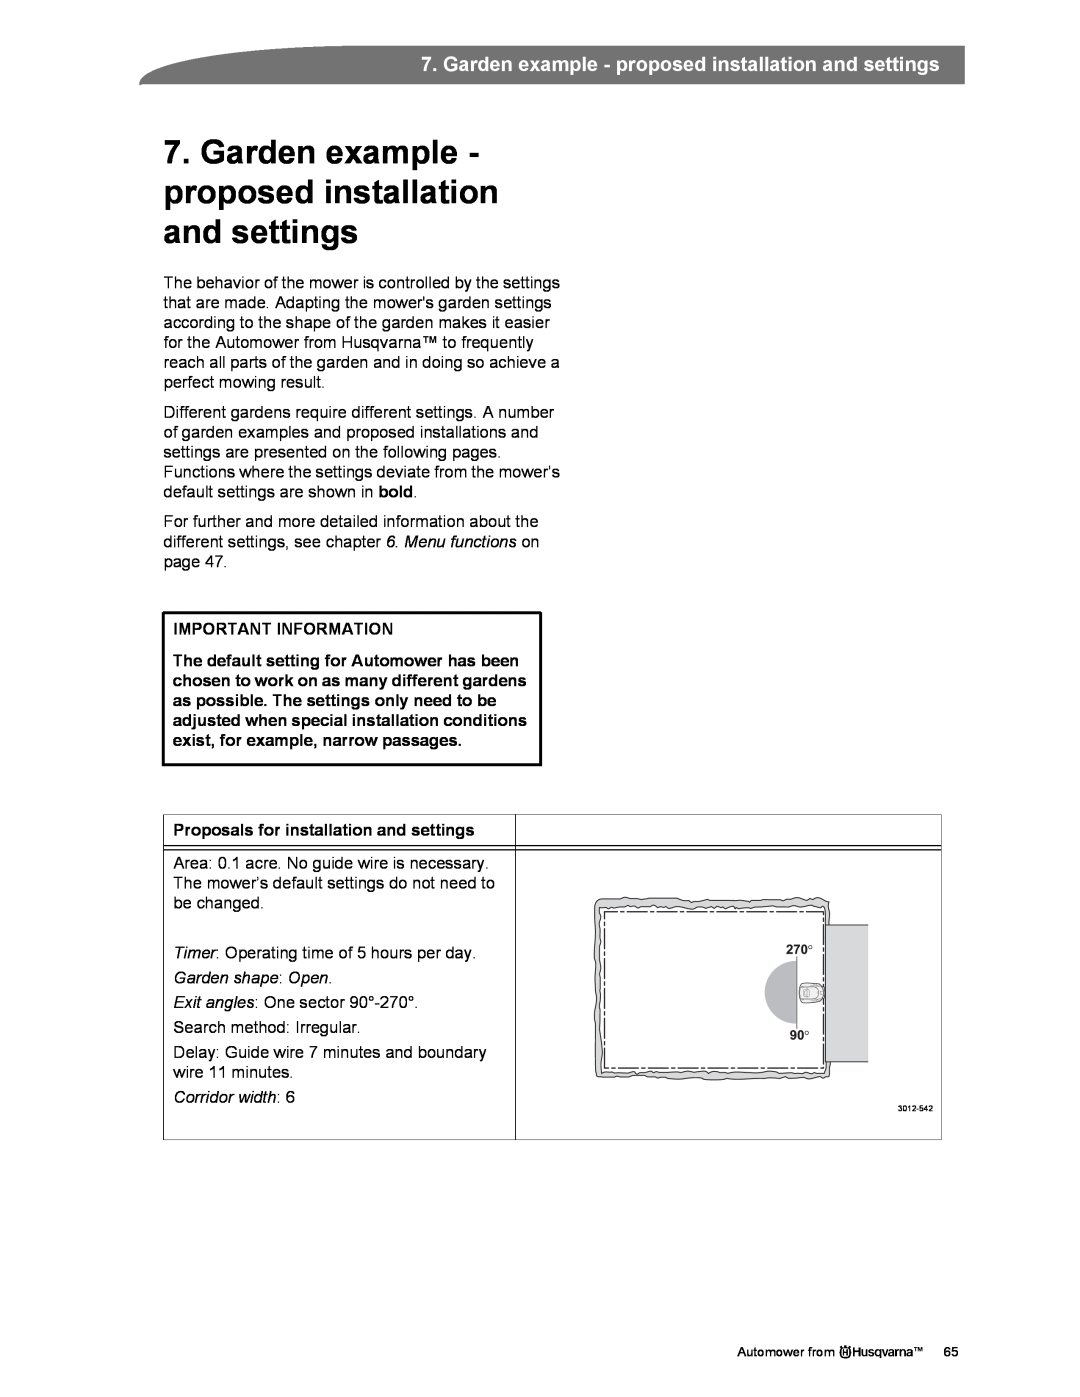 Husqvarna Automower manual Proposals for installation and settings, Important Information 